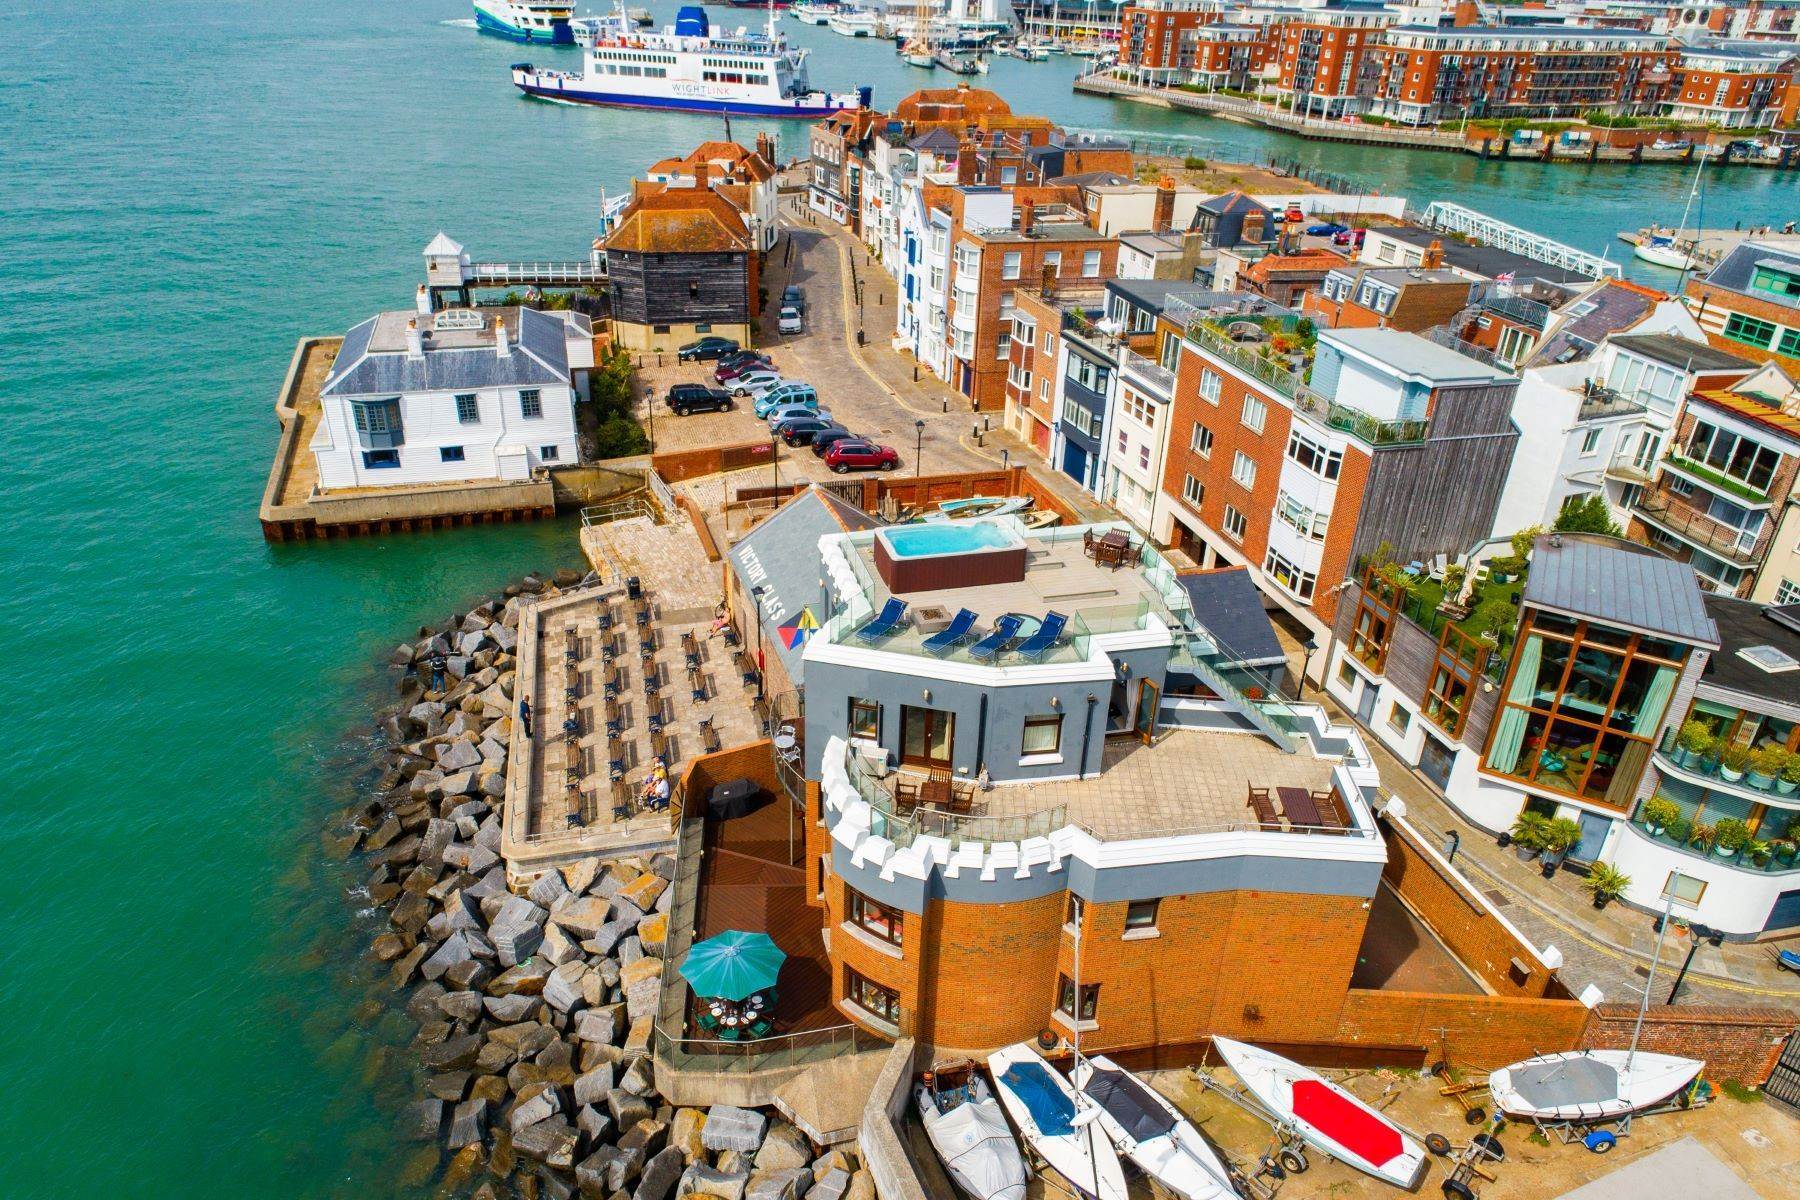 Single Family Homes for Sale at Boom Tower, West Street Portsmouth, England PO1 2JW United Kingdom